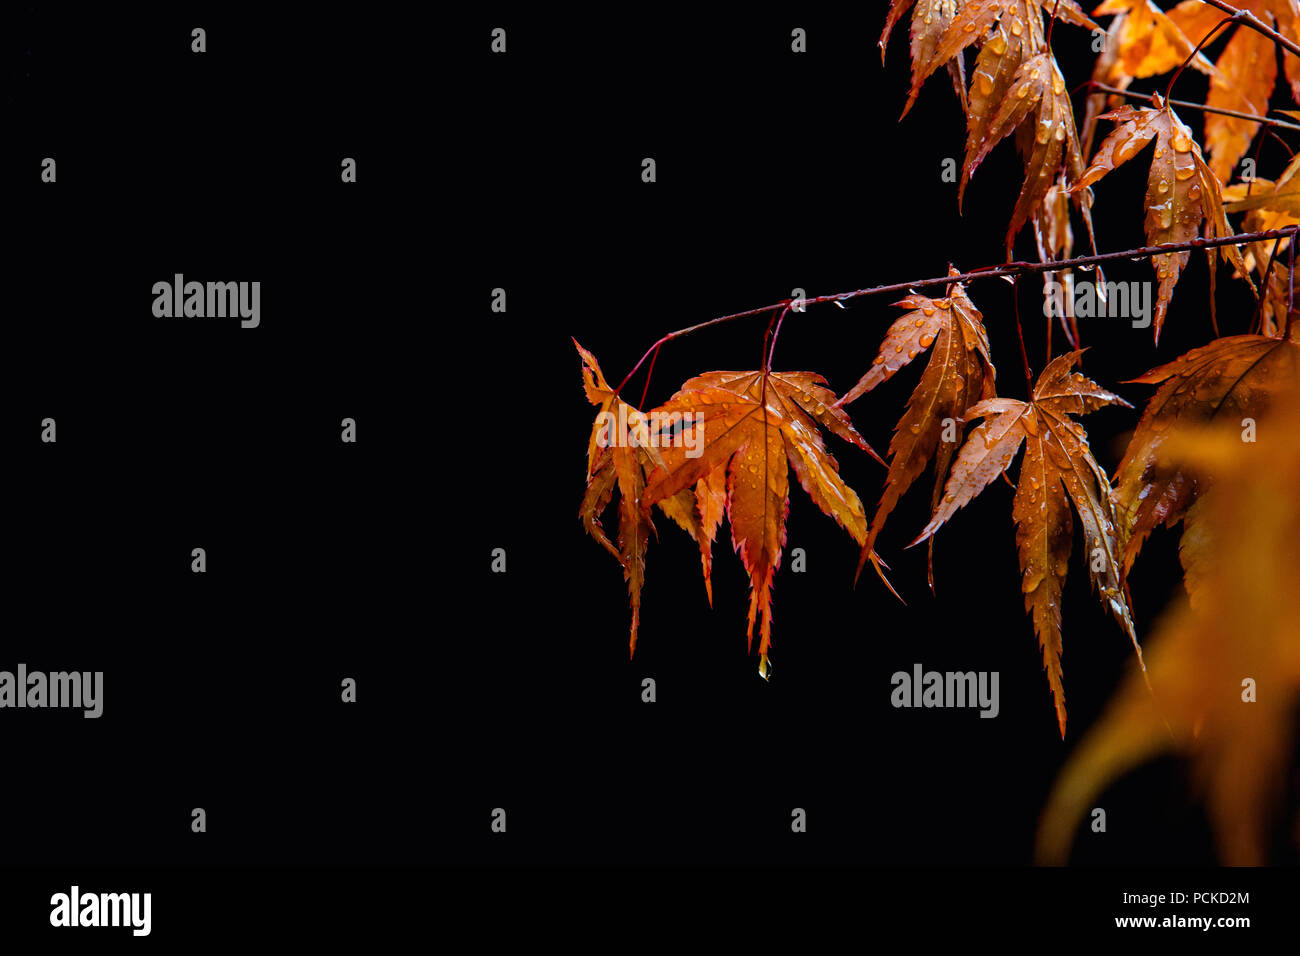 Bright orange Acer leaves in the rain on a black background Stock Photo